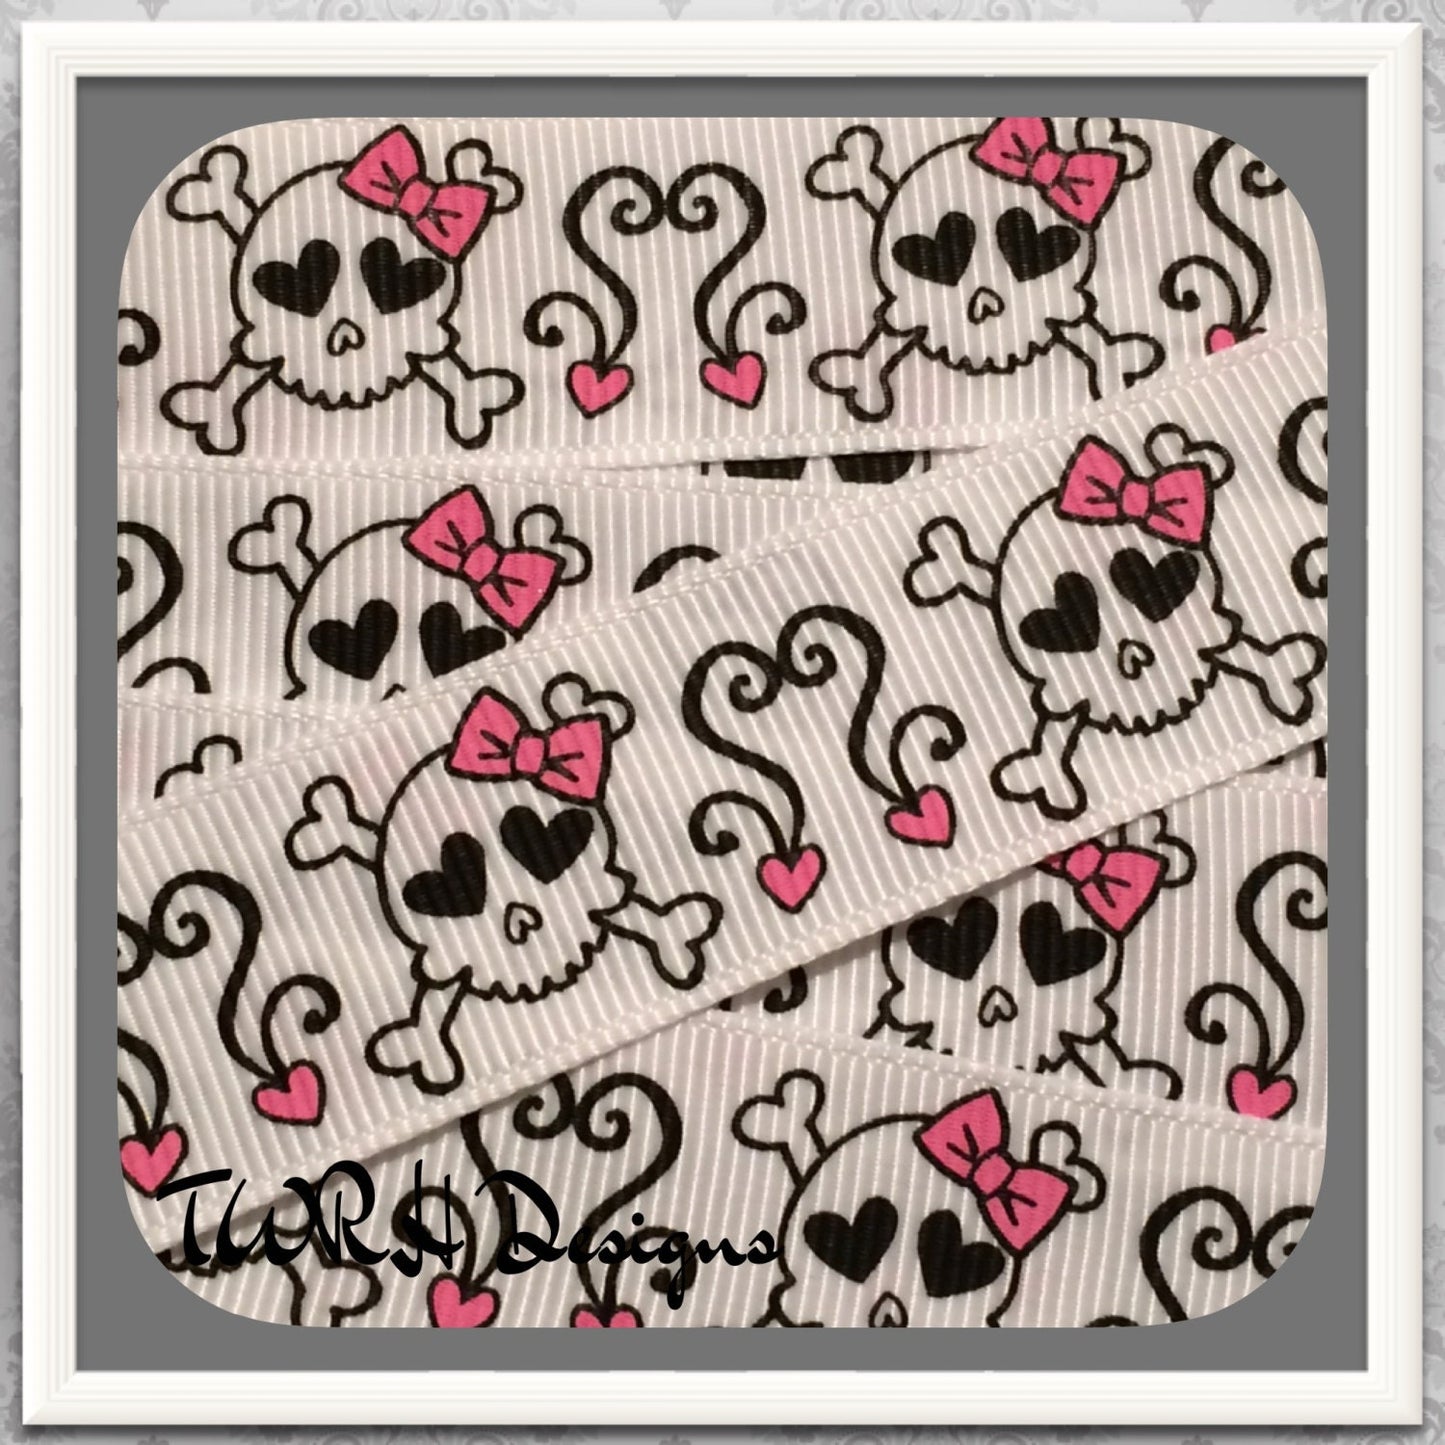 NEW: Skulls Hearts and Scrolls on white 7/8" grosgrain ribbon 6 Yards Hot Pink & Black- TWRH